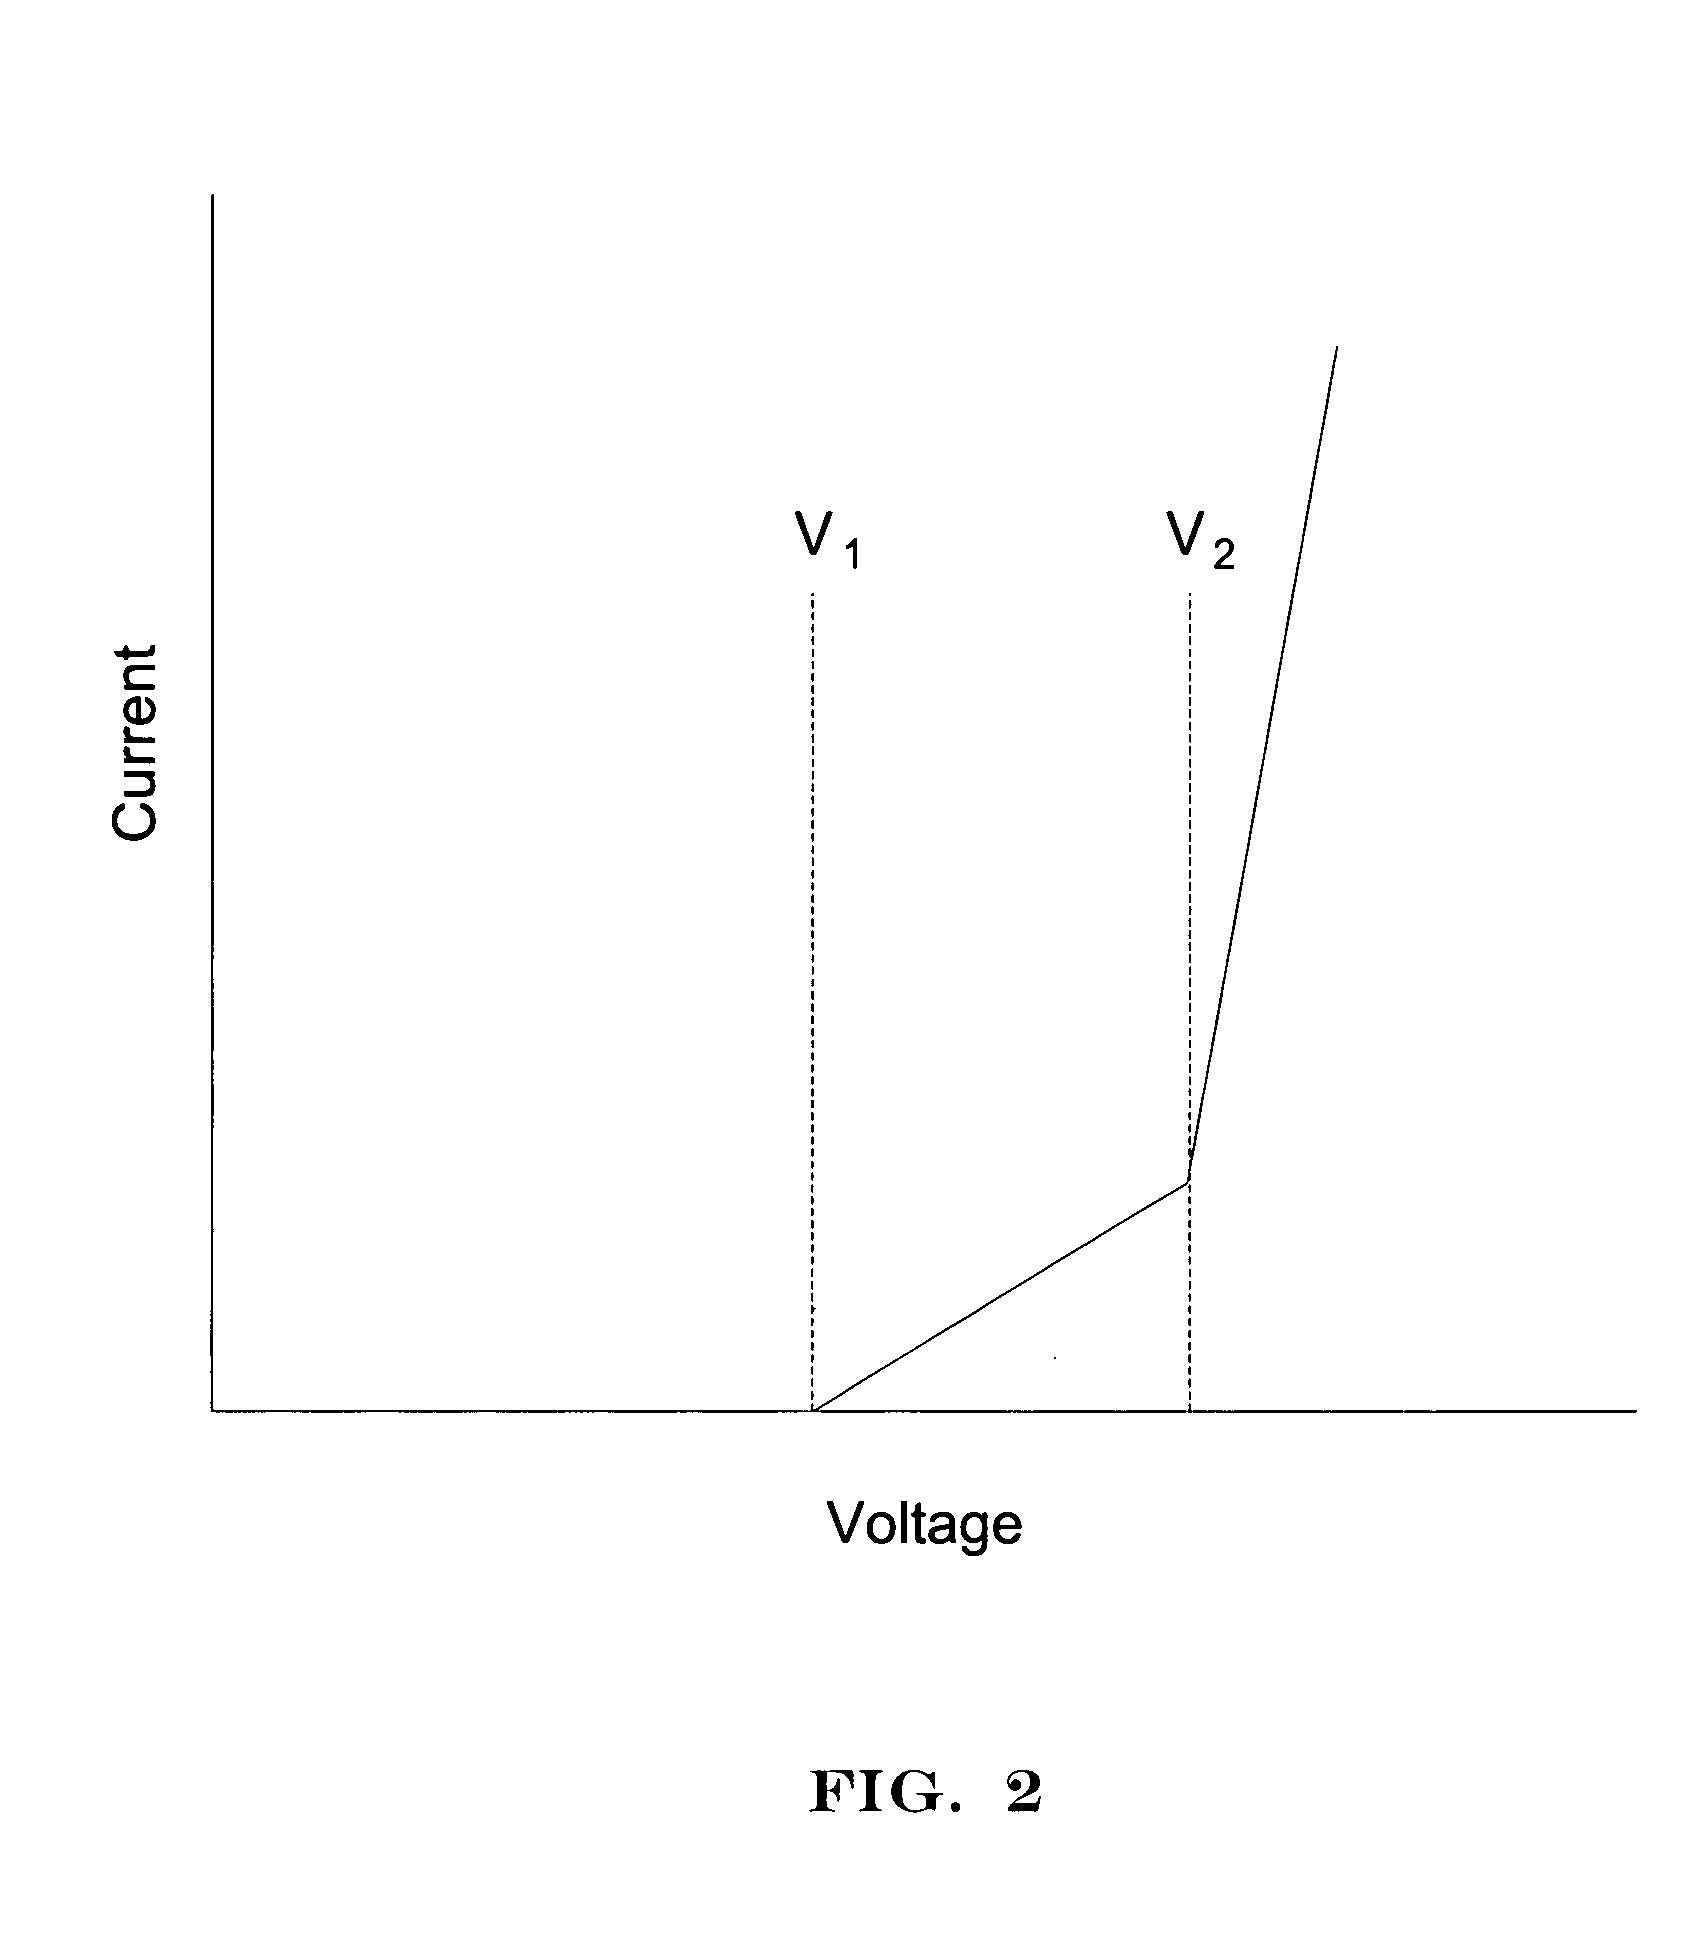 Formulations for voltage switchable dielectric material having a stepped voltage response and methods for making the same